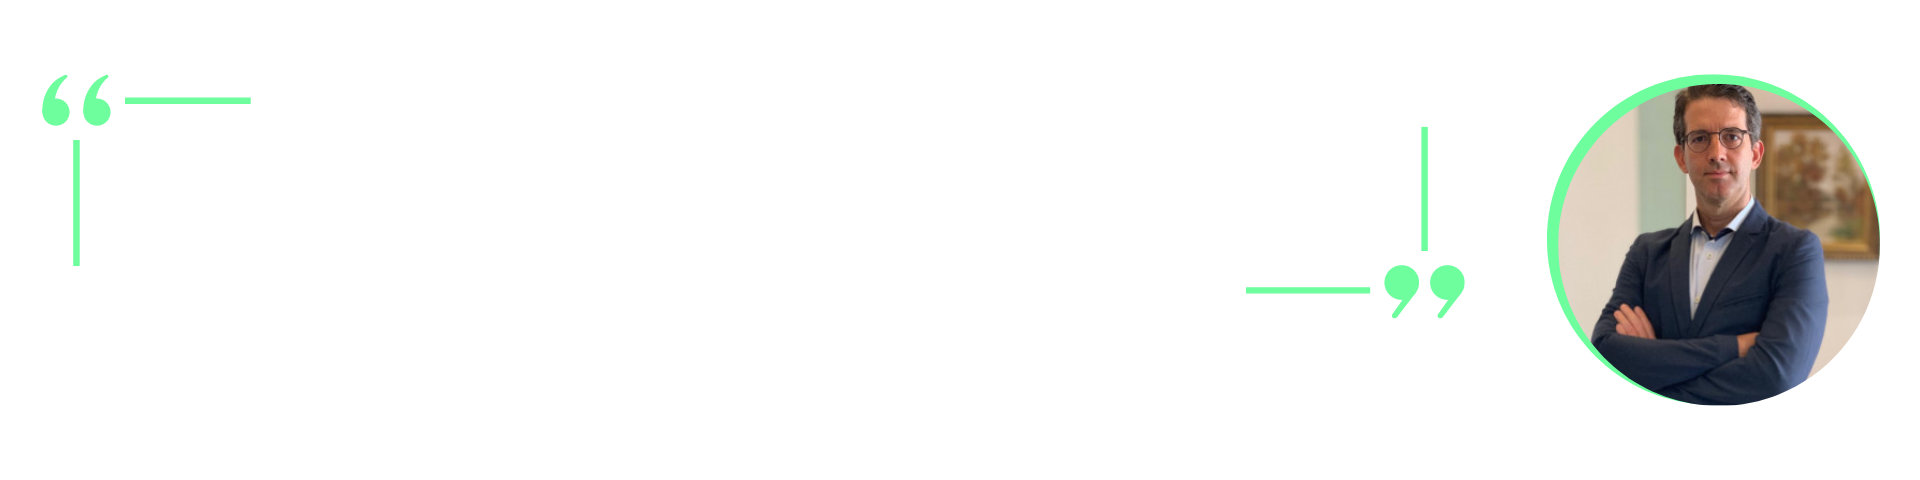 Doctor Francisco Montalverne's quotation: "In this case we have impacting the long term follow-up as well because we model the flow over the neck"